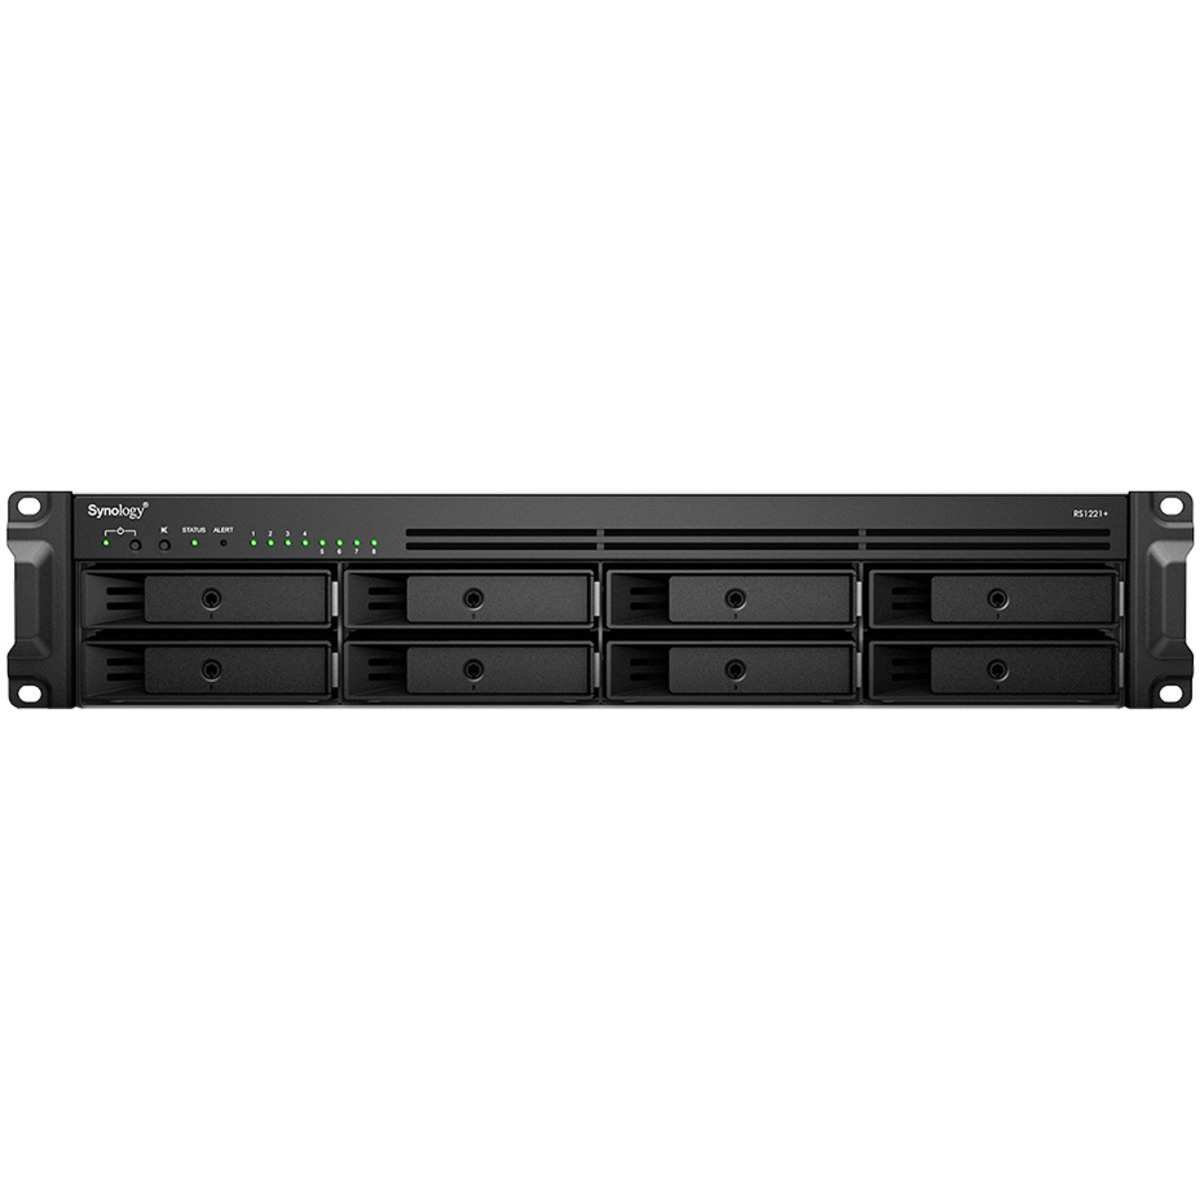 Synology RackStation RS1221+ 140tb 8-Bay RackMount Multimedia / Power User / Business NAS - Network Attached Storage Device 7x20tb Western Digital Red Pro WD201KFGX 3.5 7200rpm SATA 6Gb/s HDD NAS Class Drives Installed - Burn-In Tested RackStation RS1221+